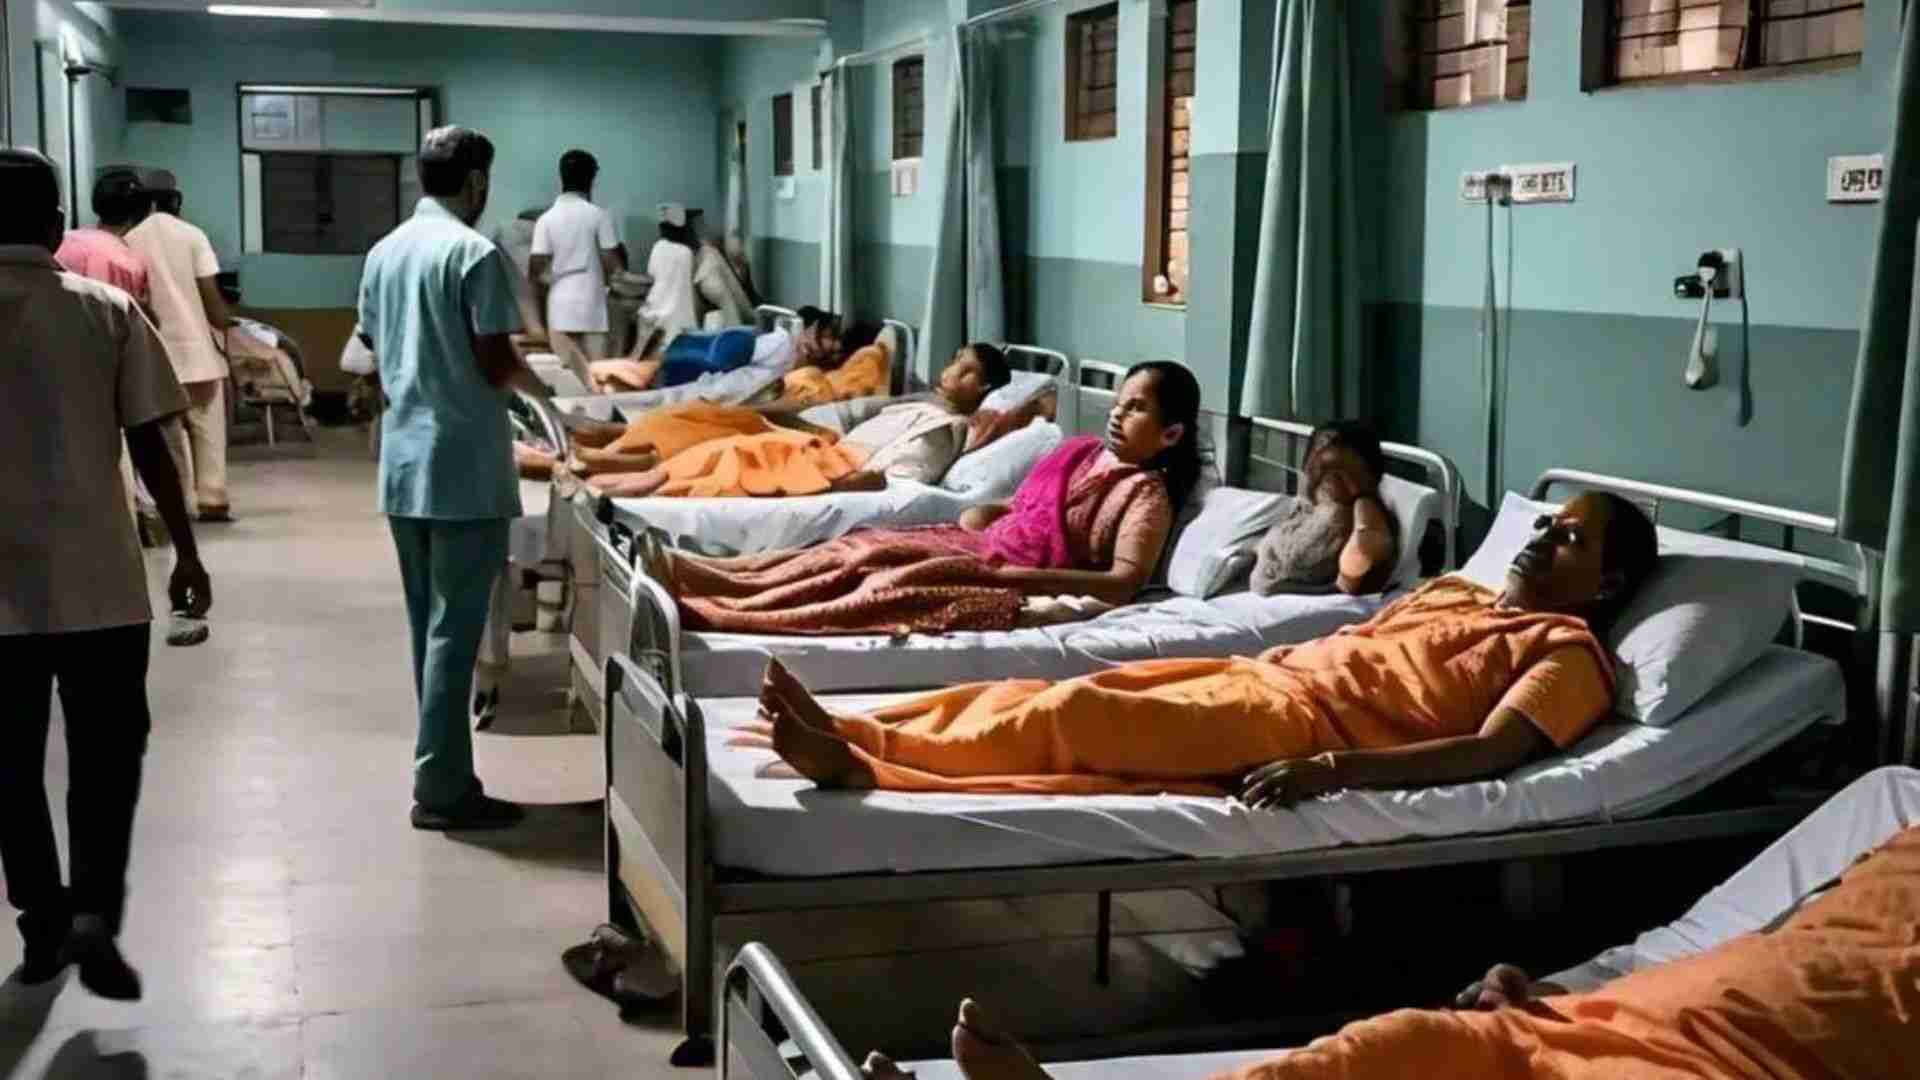 Maharashtra: 90 Hospitalized After Temple Feast; Food Poisoning Suspected